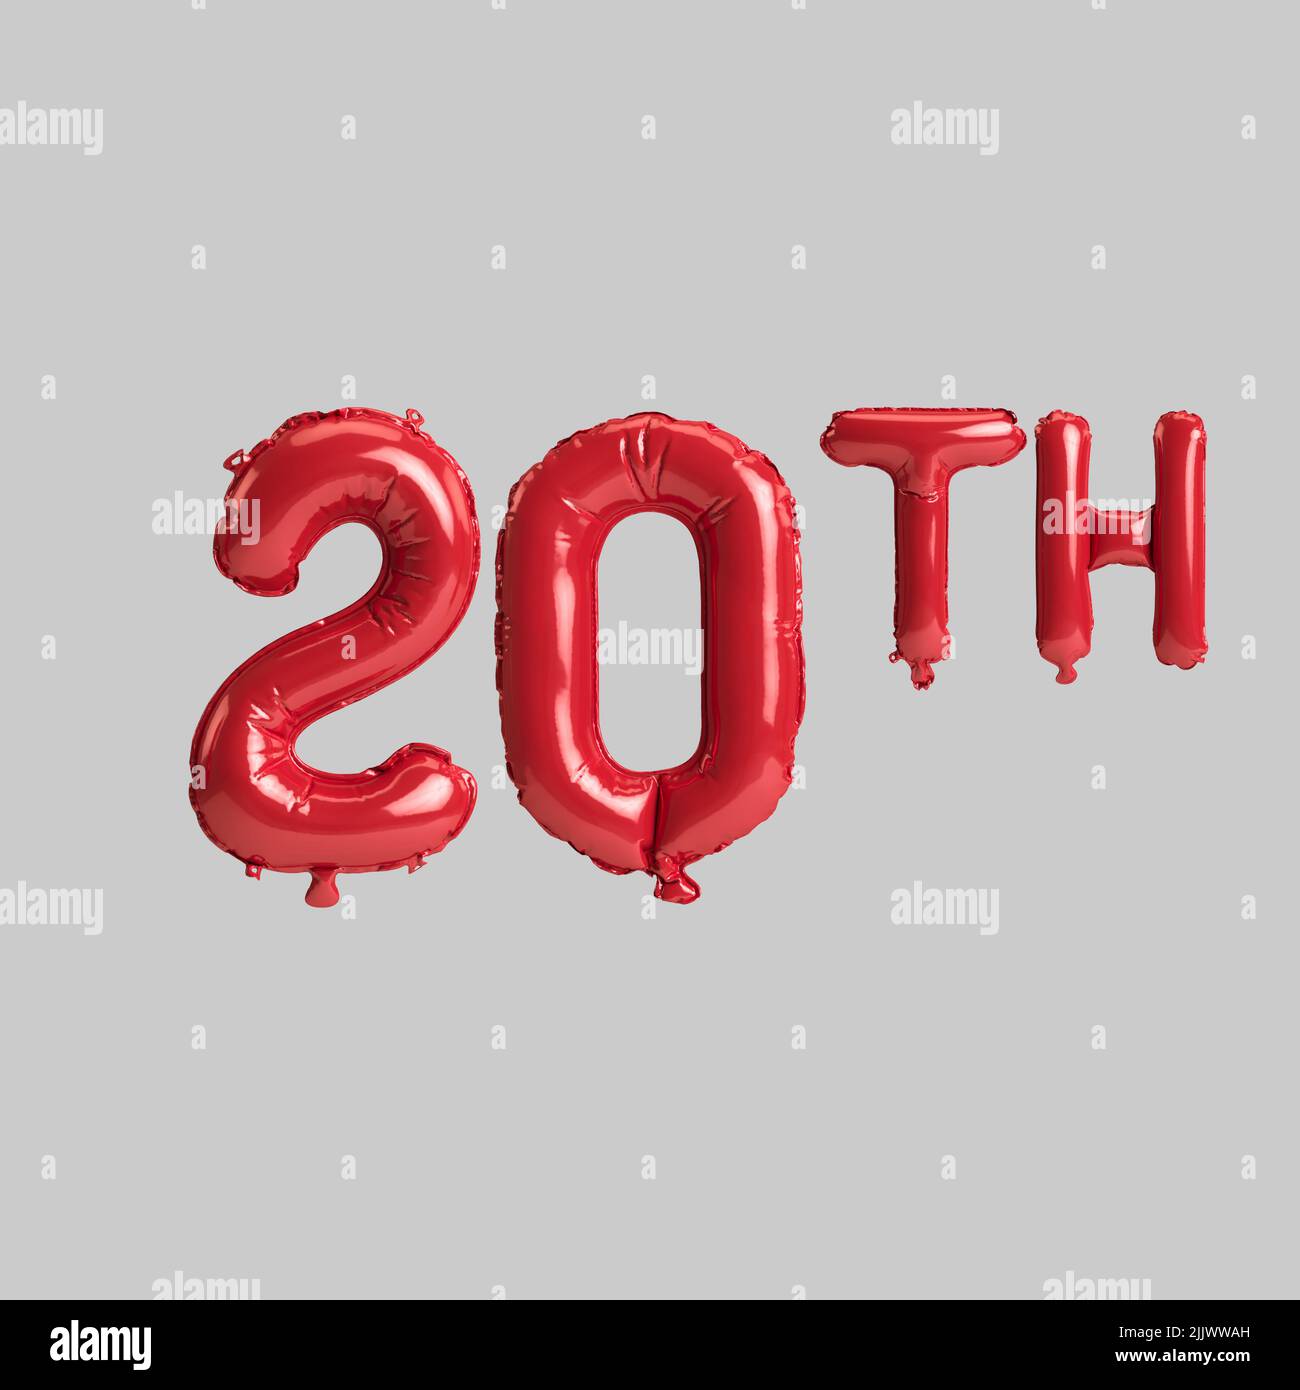 3d illustration of 20th red balloons isolated on white background Stock Photo